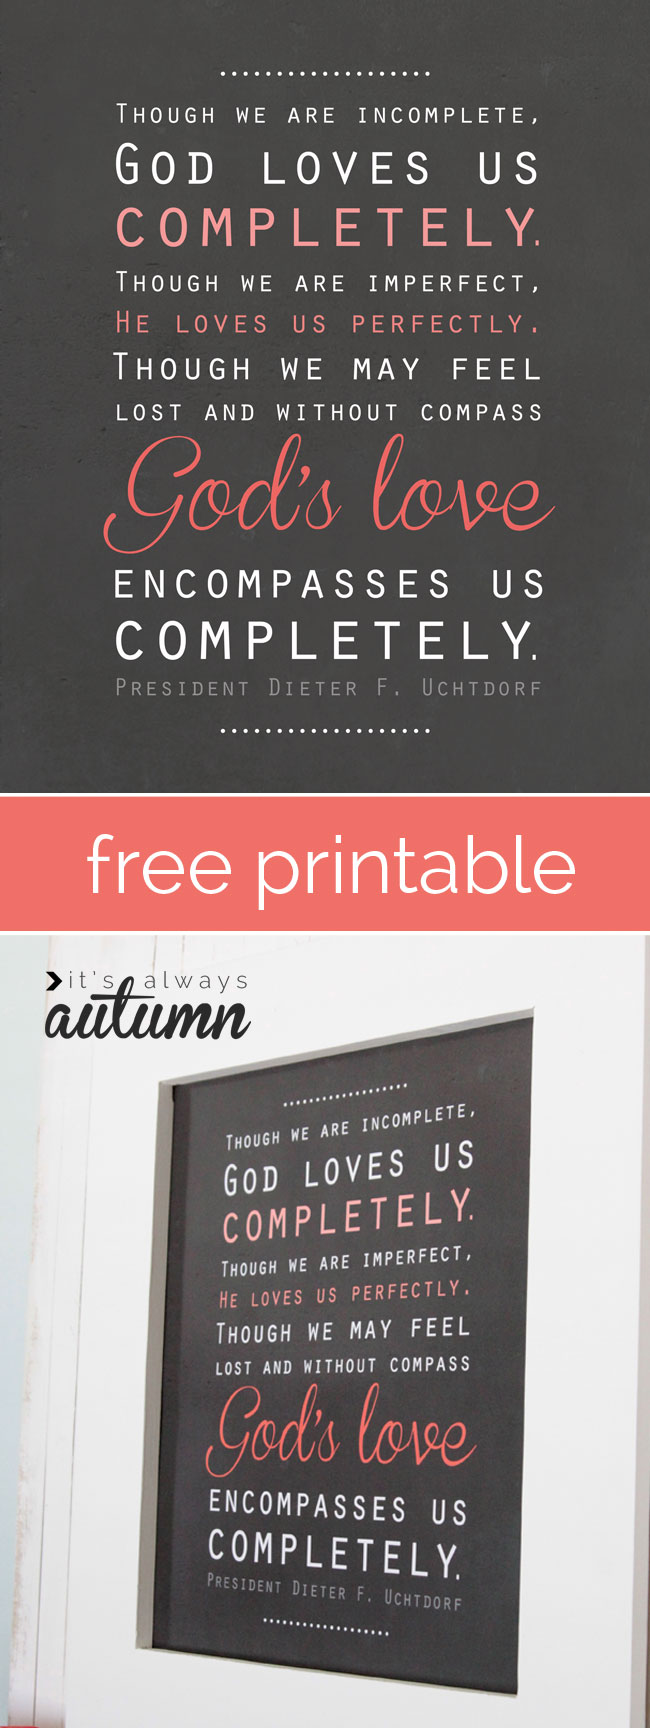 Printable LDS Quotes